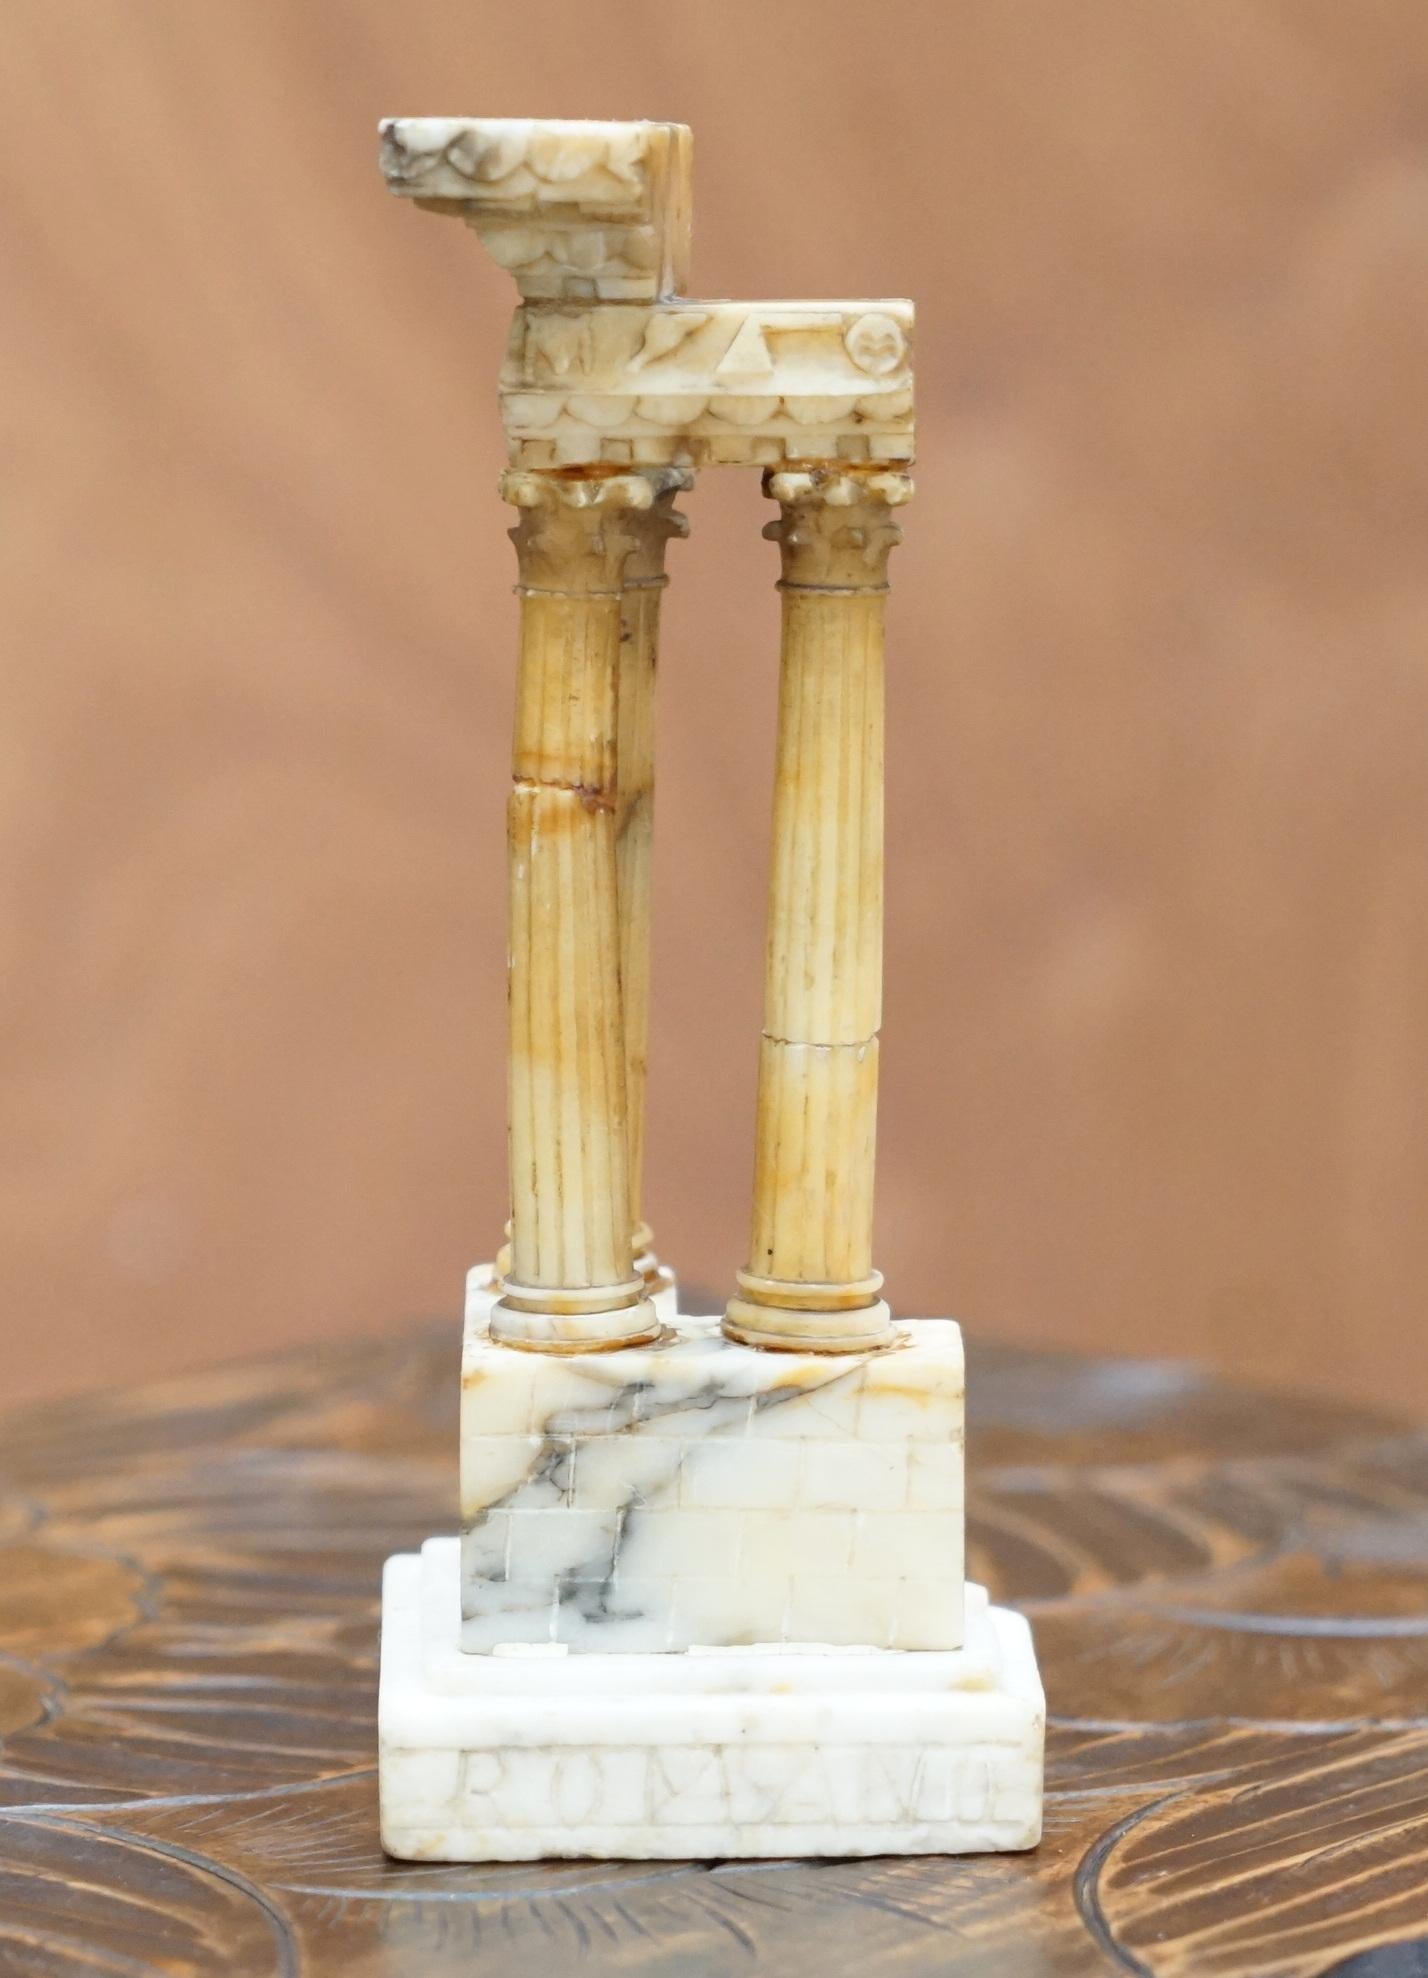 We are delighted to offer for sale this extremely collectable original Victorian Marble Grand Tour Roman Ruin statue of columns

A wonderful original piece, this is a desk sized collectable, these Roman Ruins are just about as hot right now as